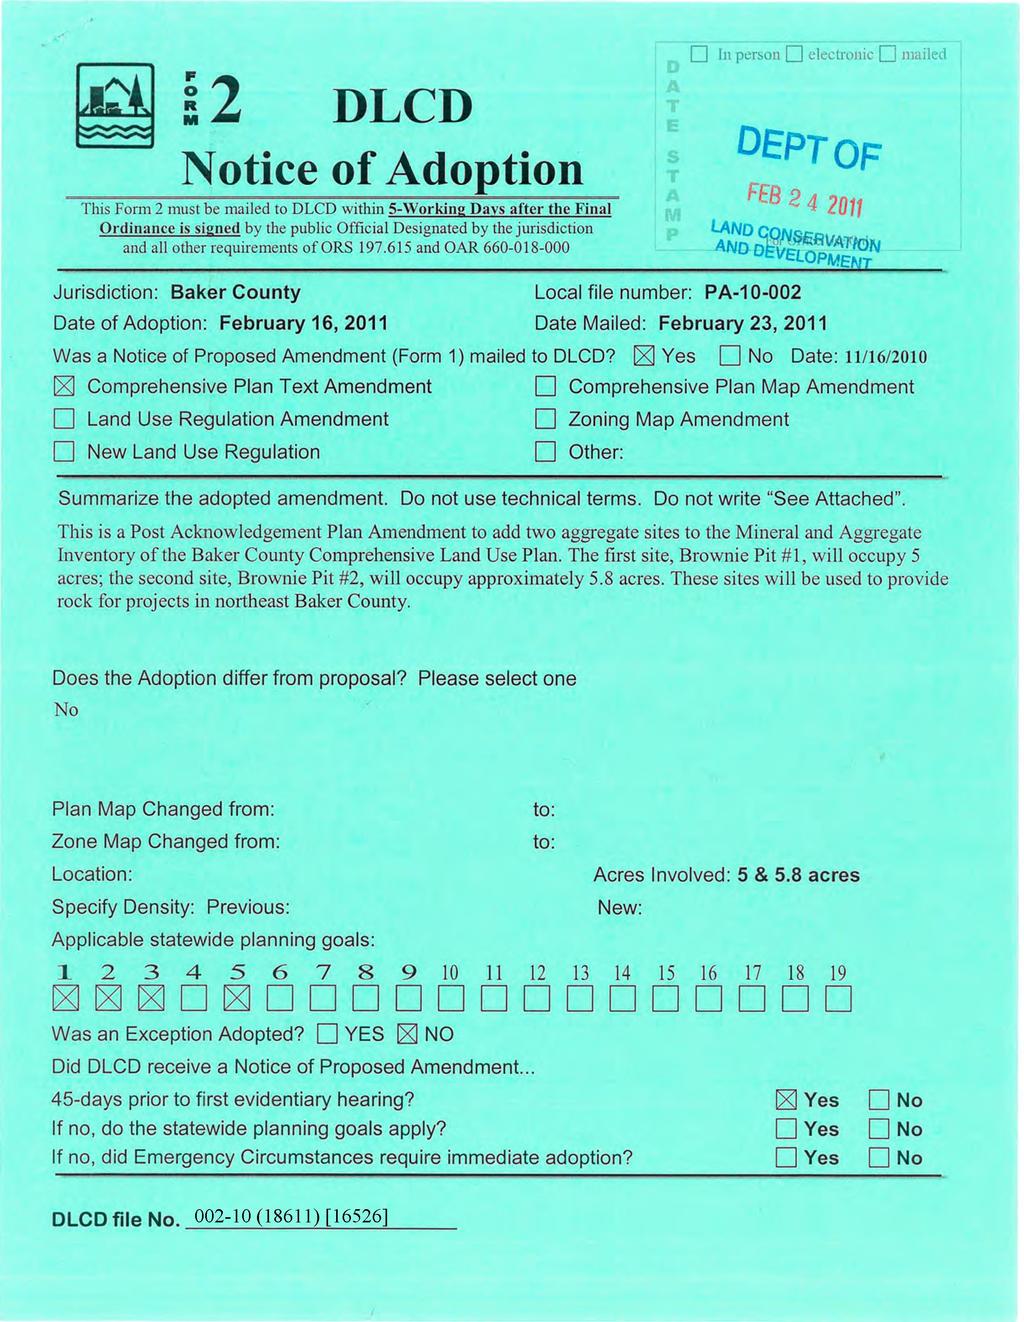 12 DLCD Notice of Adoption This Form 2 must be mailed to DLCD within 5 I Workjng Din s after the Final Ordinance is signed by die public Official Designated by the jurisdiction and all other